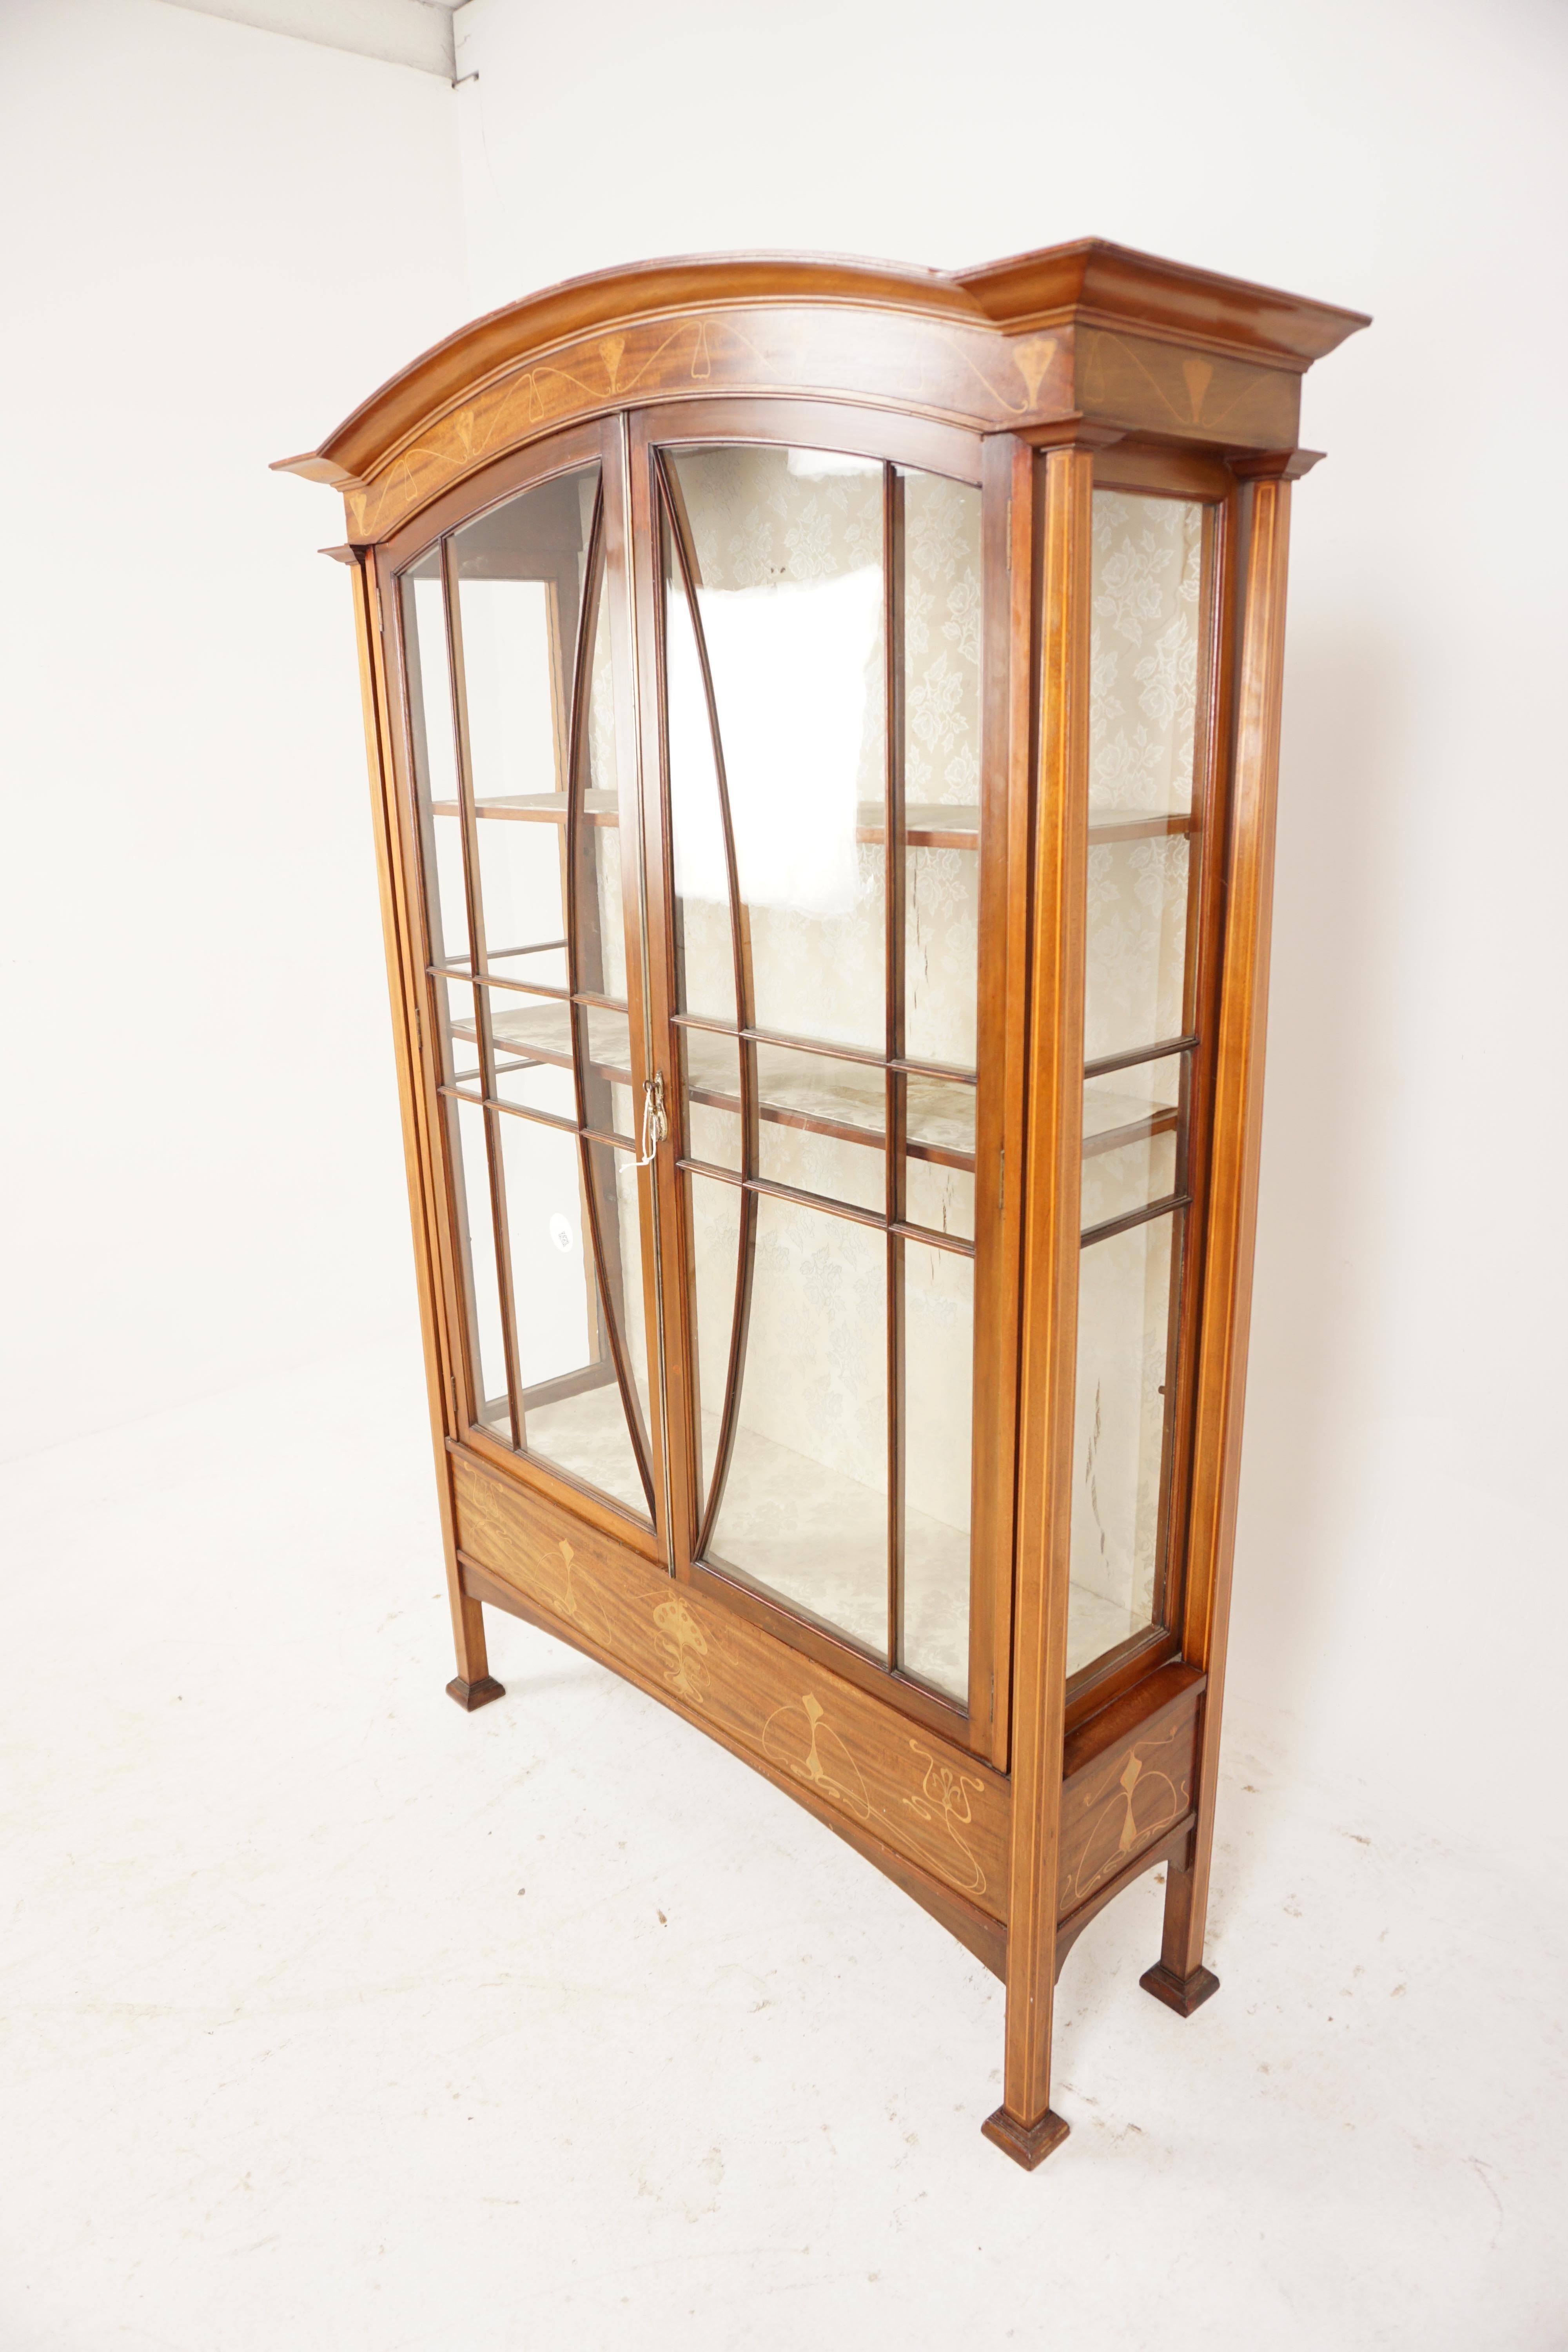 Antique Inlaid Art Nouveau Walnut Display China Cabinet, Scotland 1910, H1001

Solid walnut + veneers
Original Finish
Curved inlaid cornice on top
Pair of original glass doors
Flanked by inlaid pillars on the sides
Working lock and key
Below inlaid